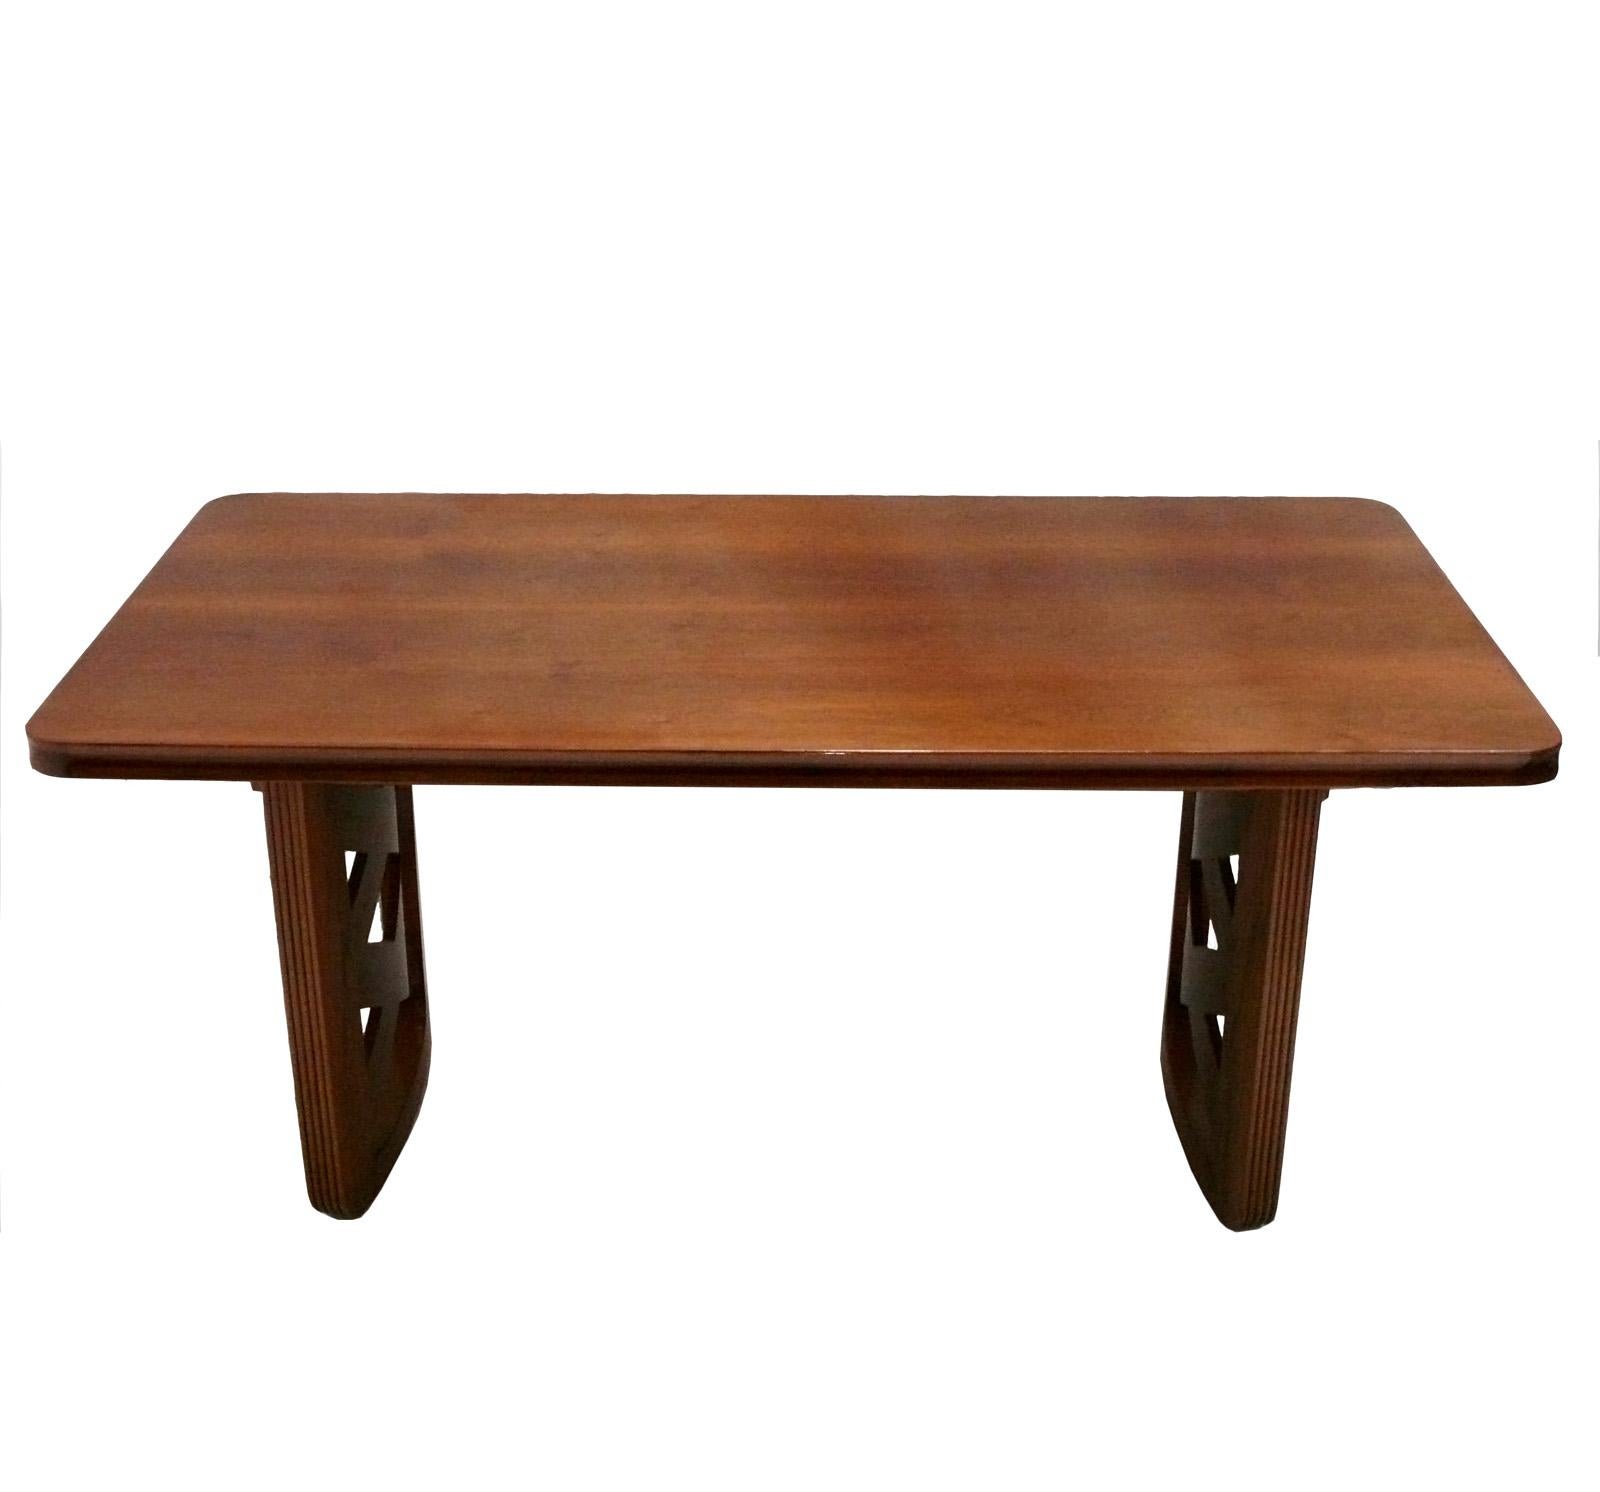 French Art Deco Style dining or library table, France, circa 1990s. This piece is a versatile size and can be used as a dining table, library table, desk, bar, or console table.